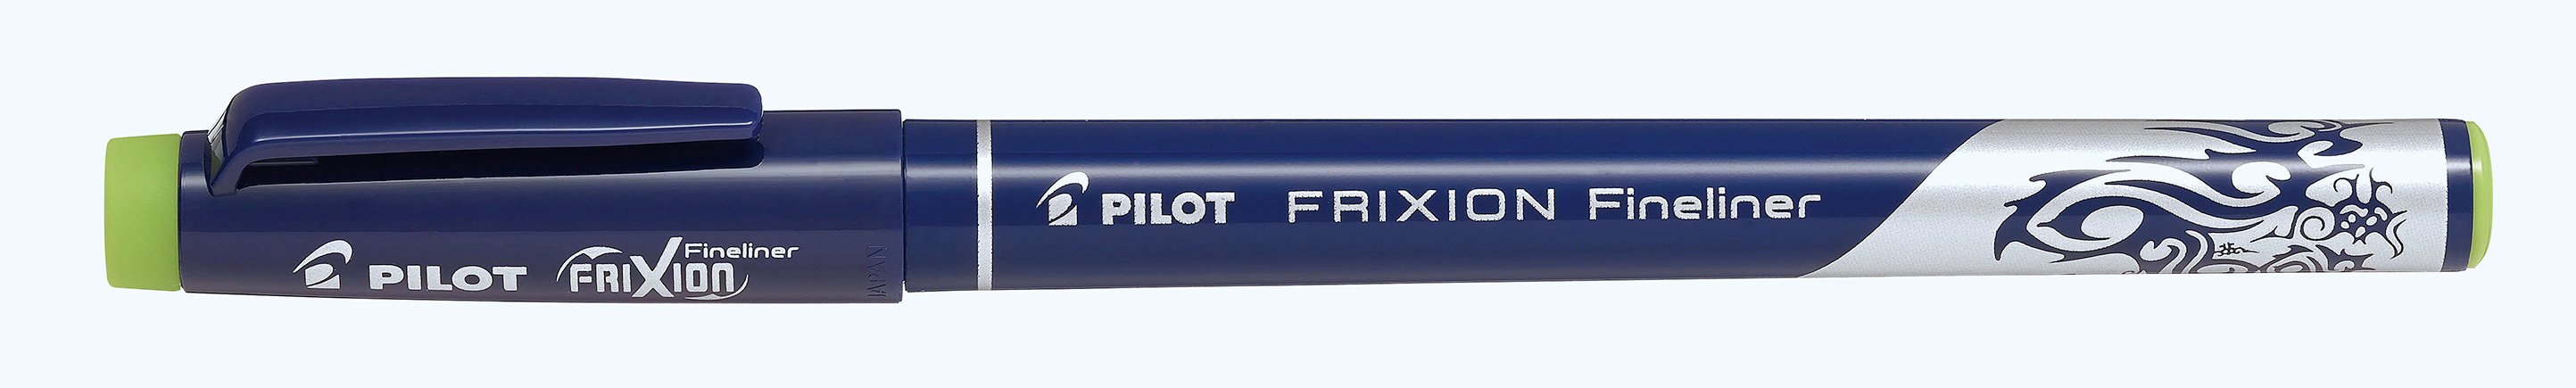 PILOT FriXion Fineliner 1.3mm SW-FF-LG vert clair, corrigeable